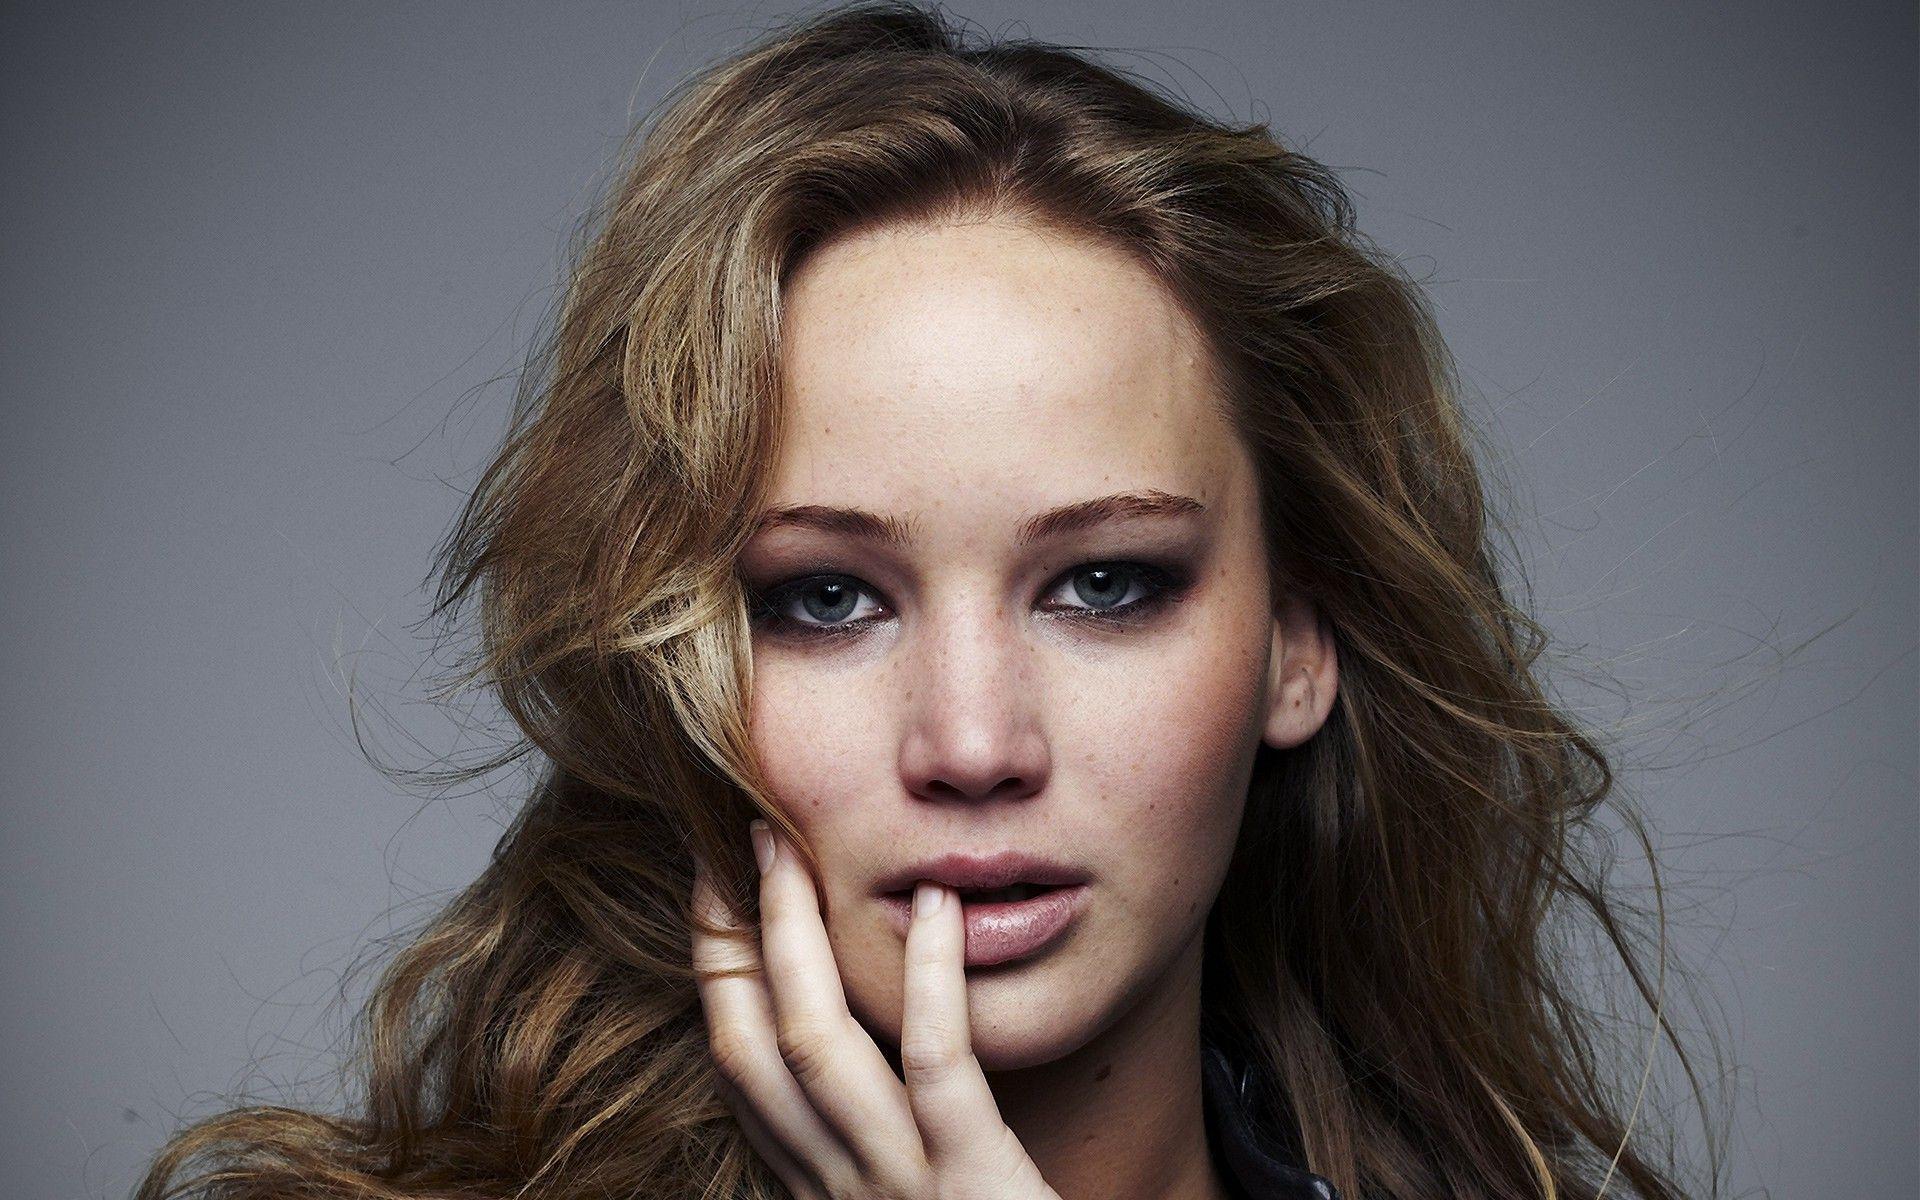 Jennifer Lawrence is an American actress and producer. She has won multiple awards for her work in films such as The Hunger Games and Silver Linings Playbook. - Jennifer Lawrence